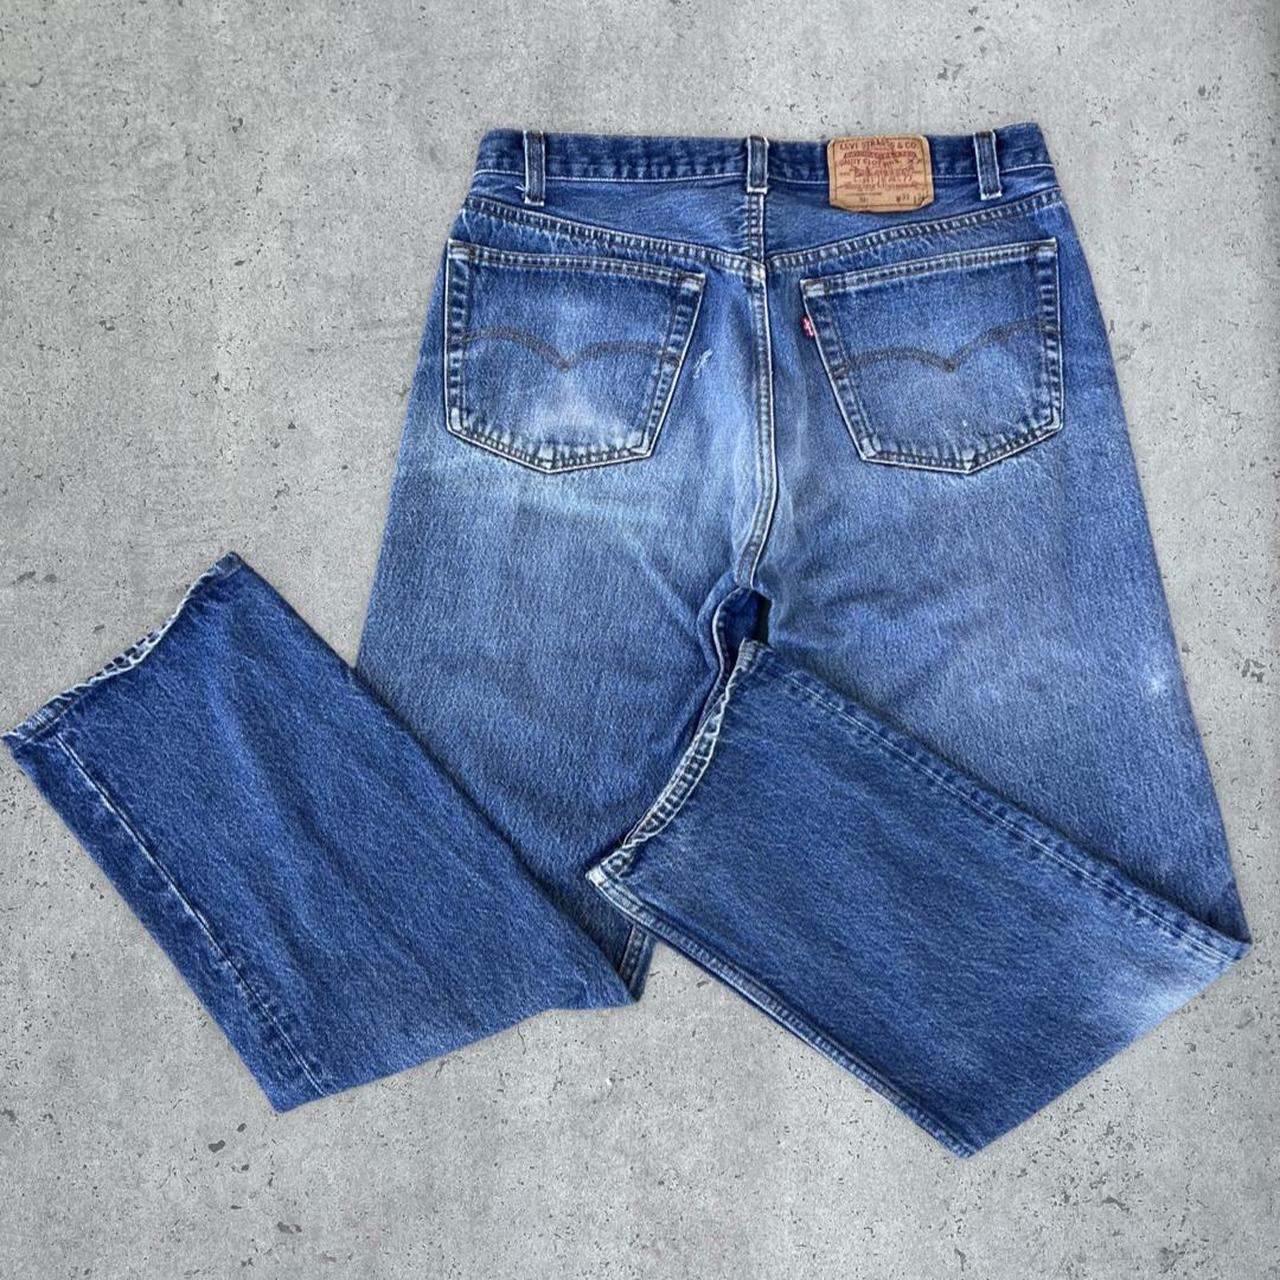 Levi's Men's Blue and Navy Jeans